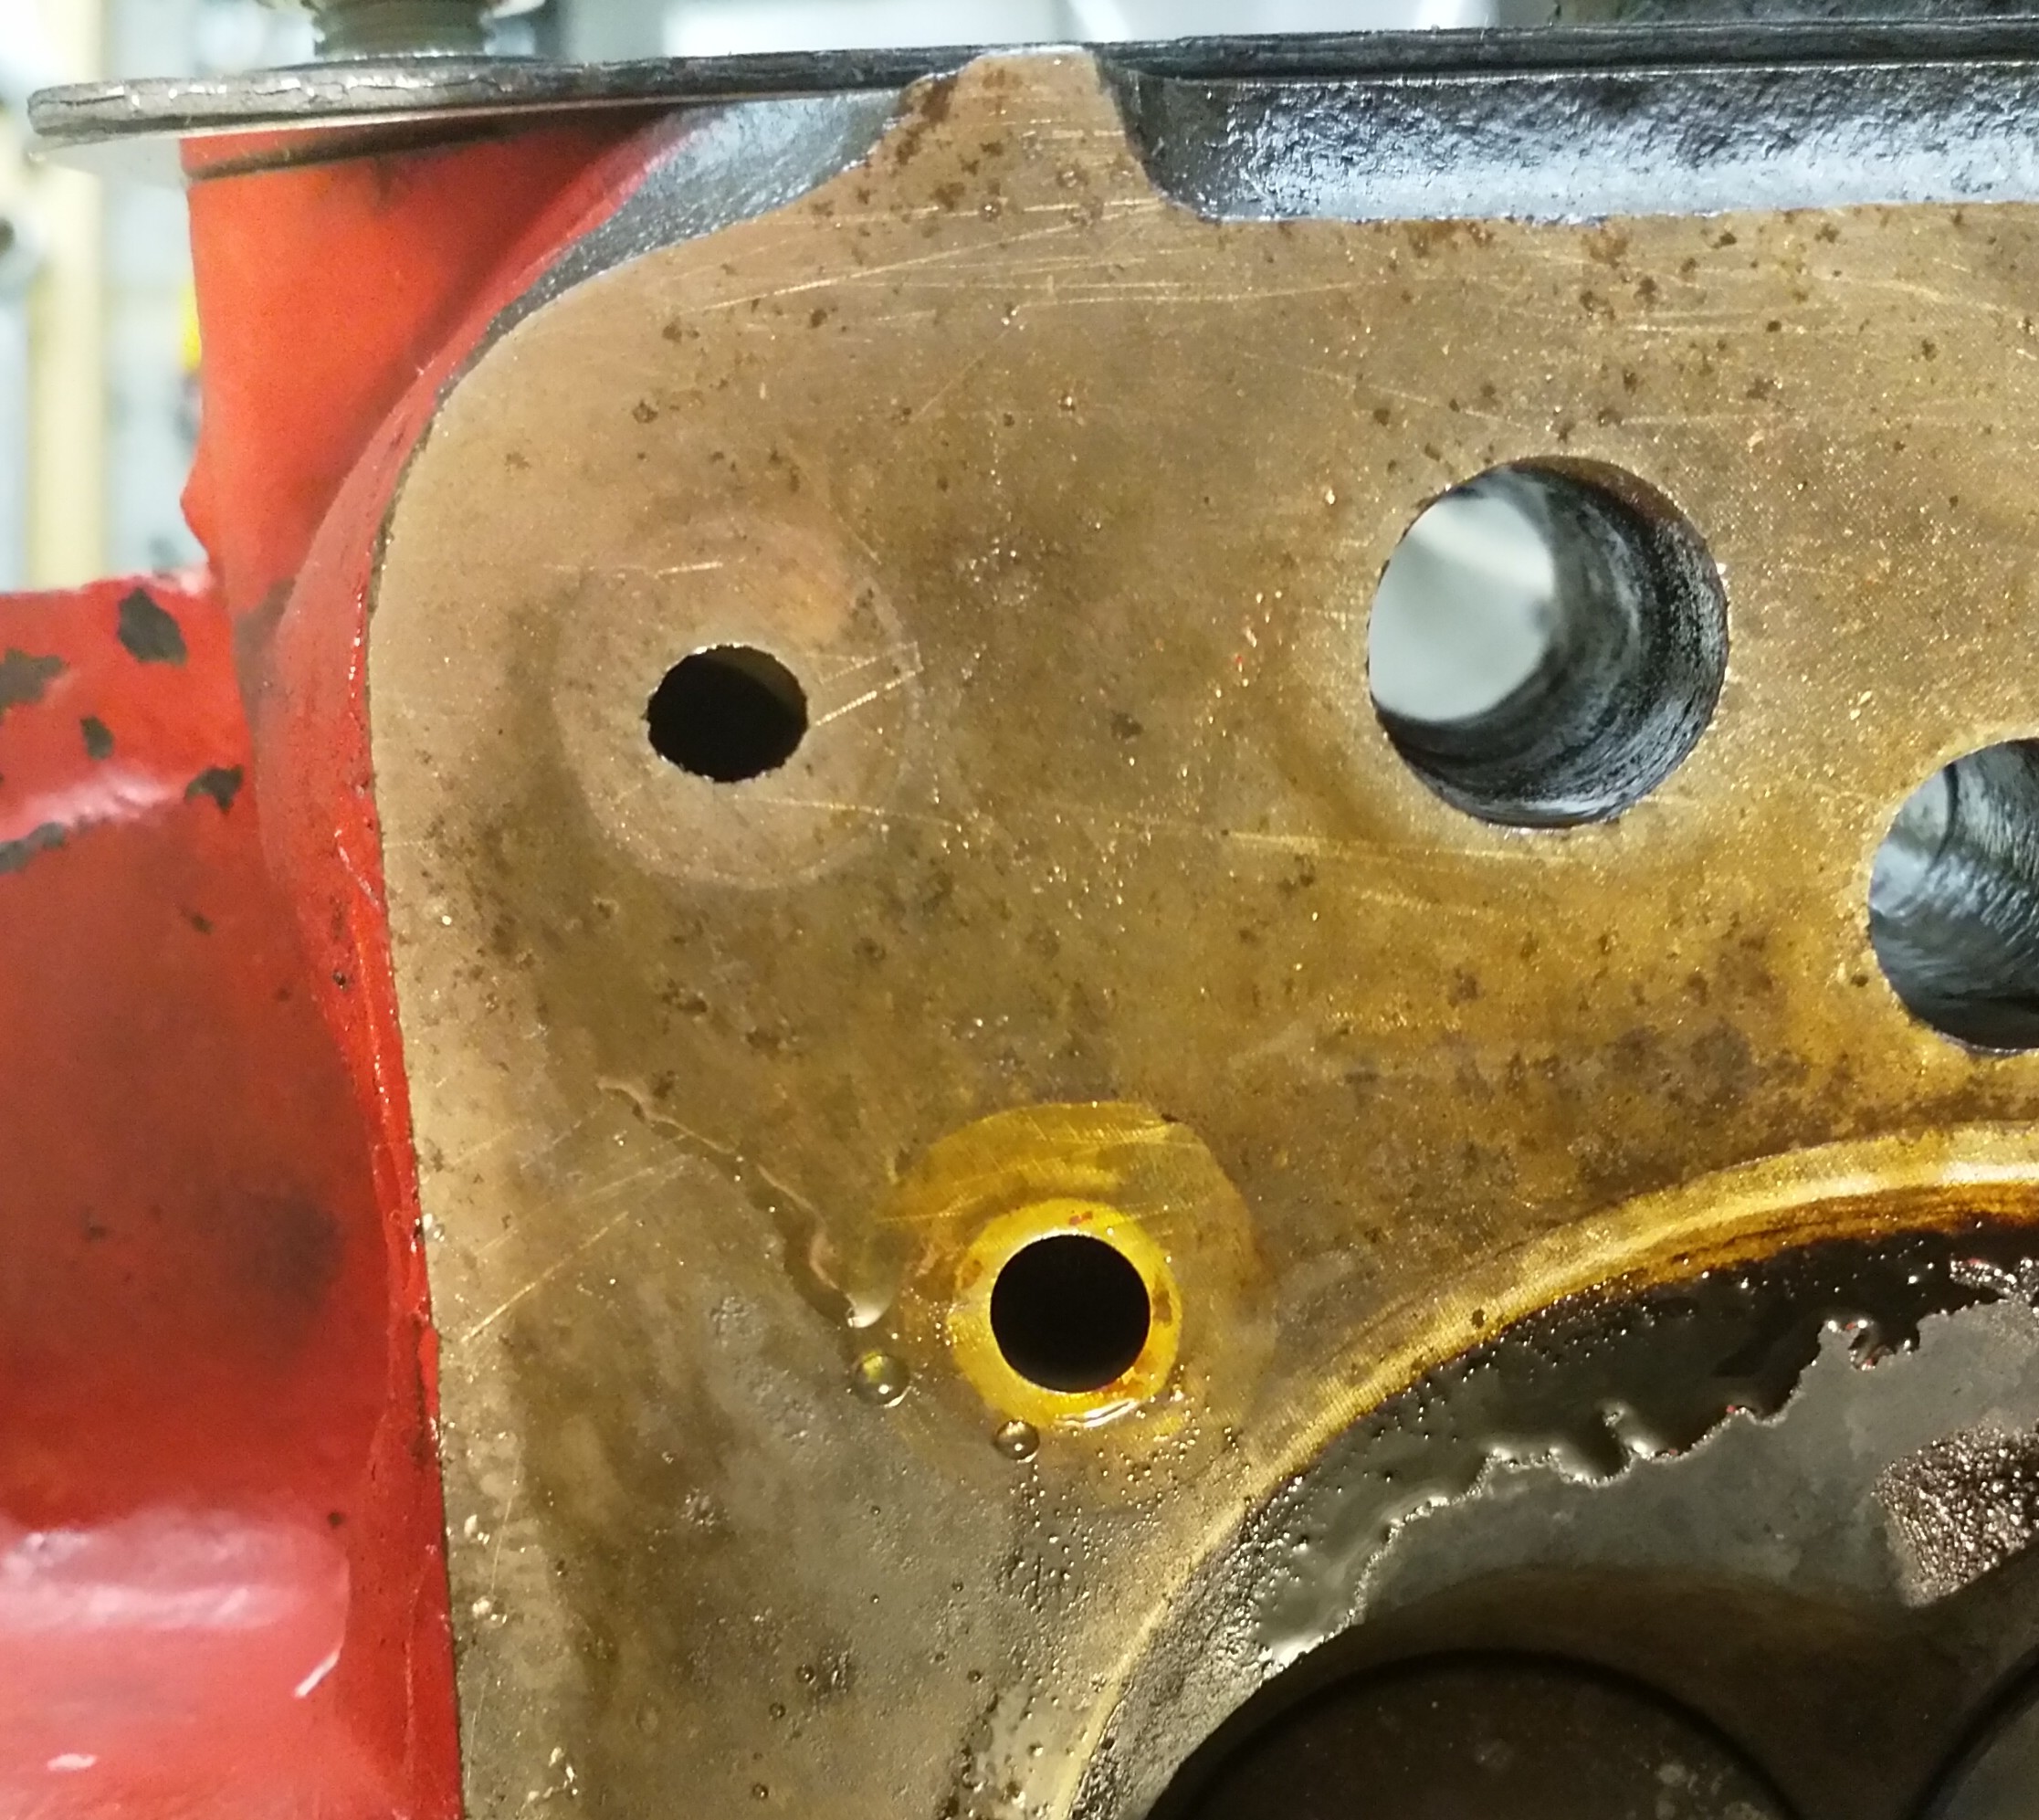 Underside of the head. The leak builds up at the top edge of the head, to the right of the protrusion in the head face, next to the hole for the pushrod.